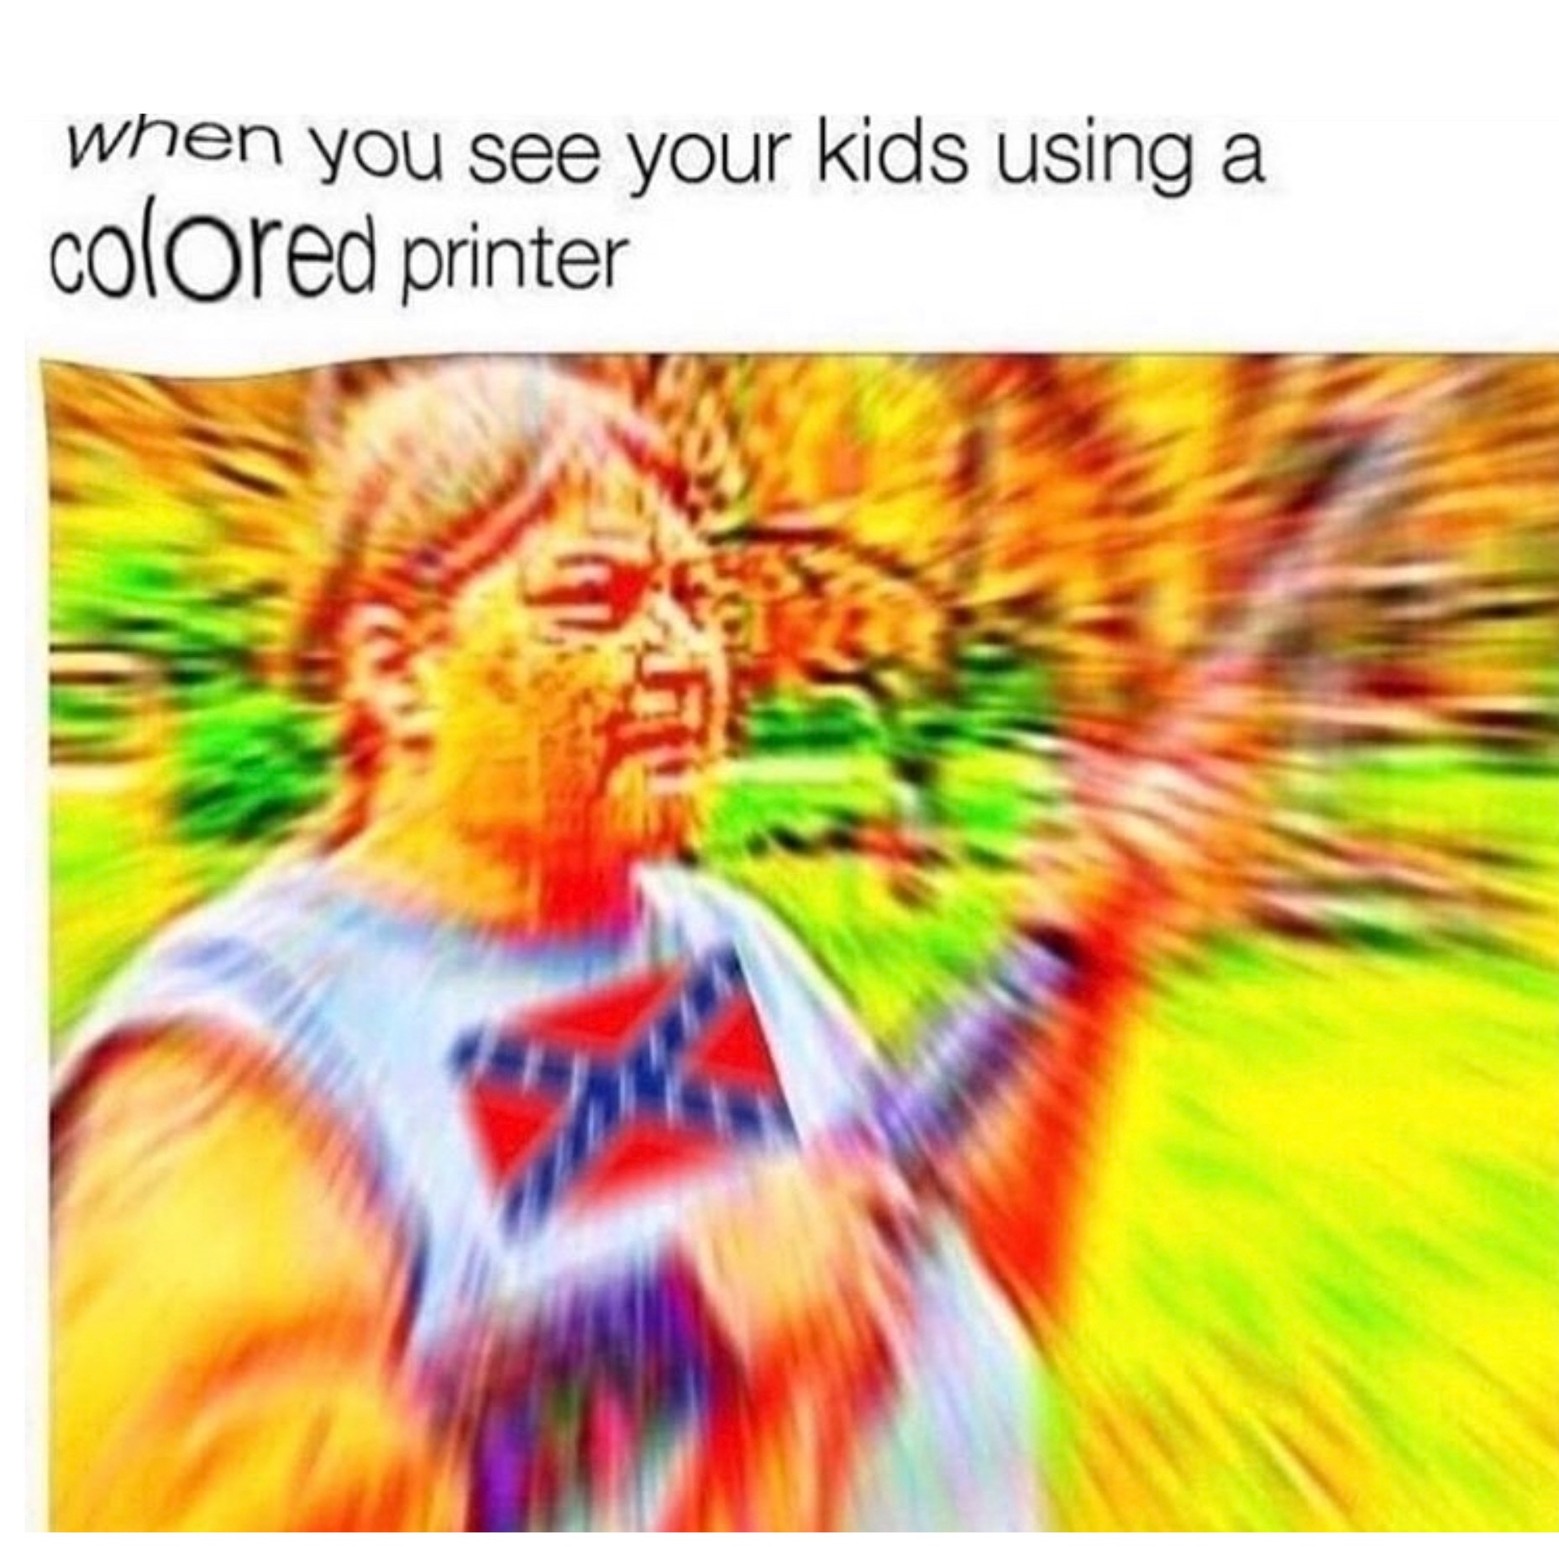 graphics - when you see your kids using a colored printer